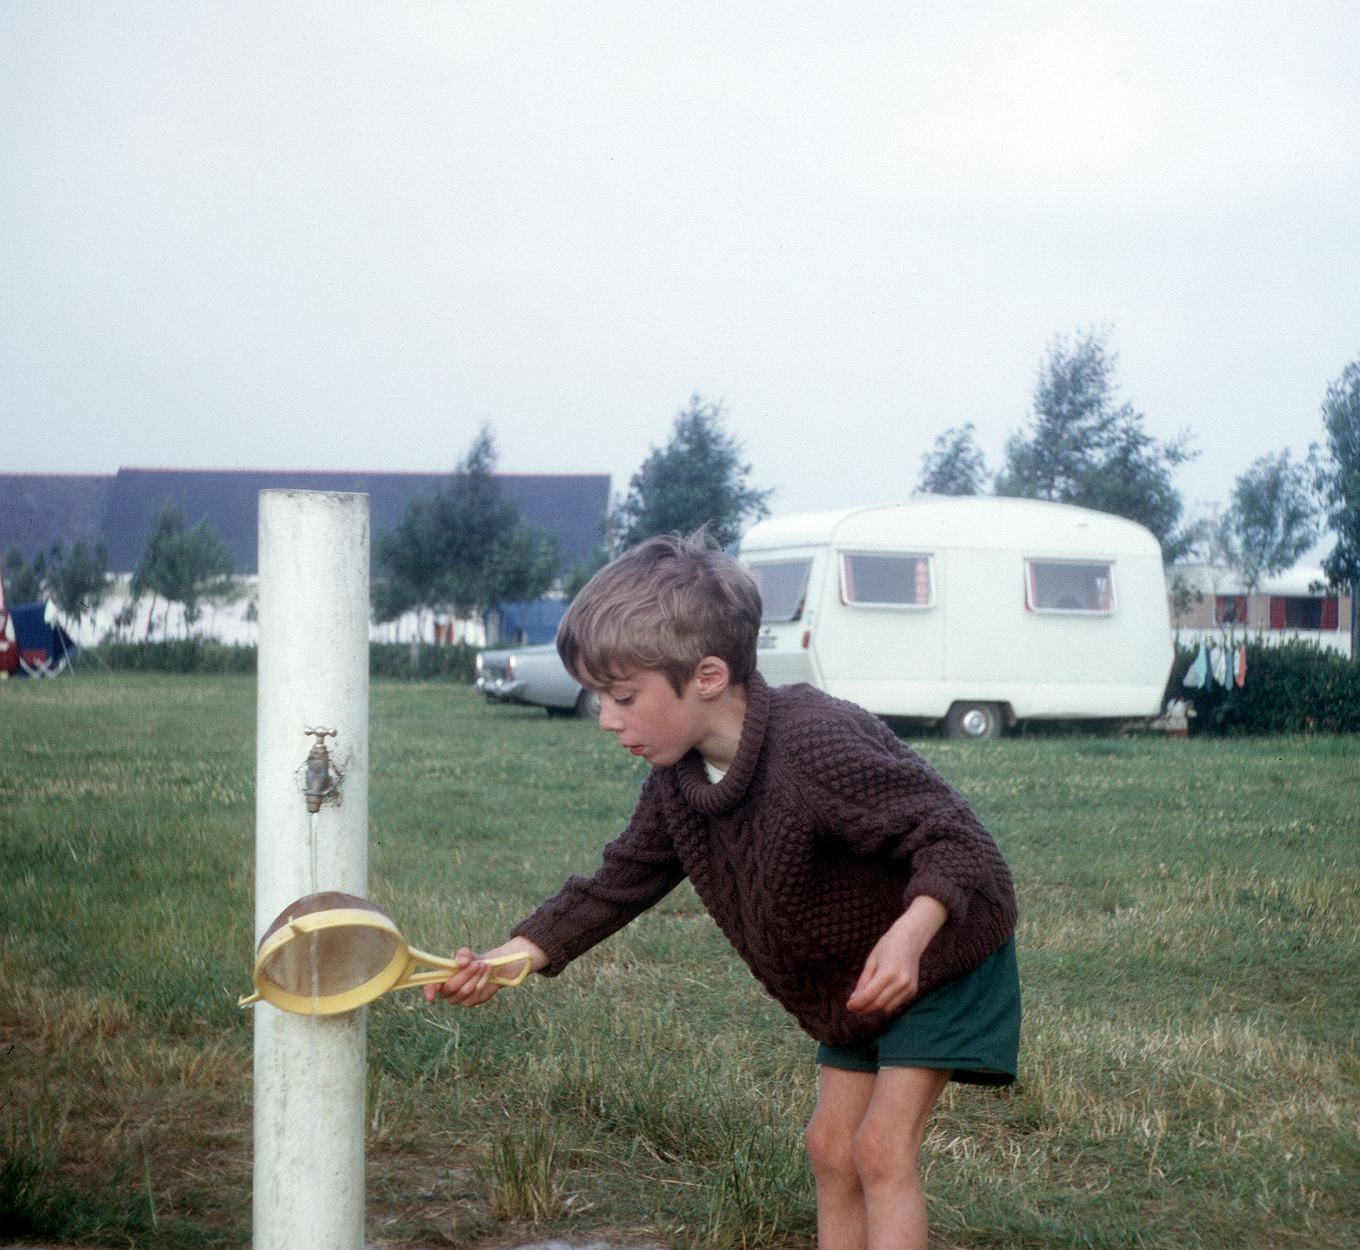 7102212k May 1971 - Jon cleaning the sieve under a tap at the Benodet campsite.